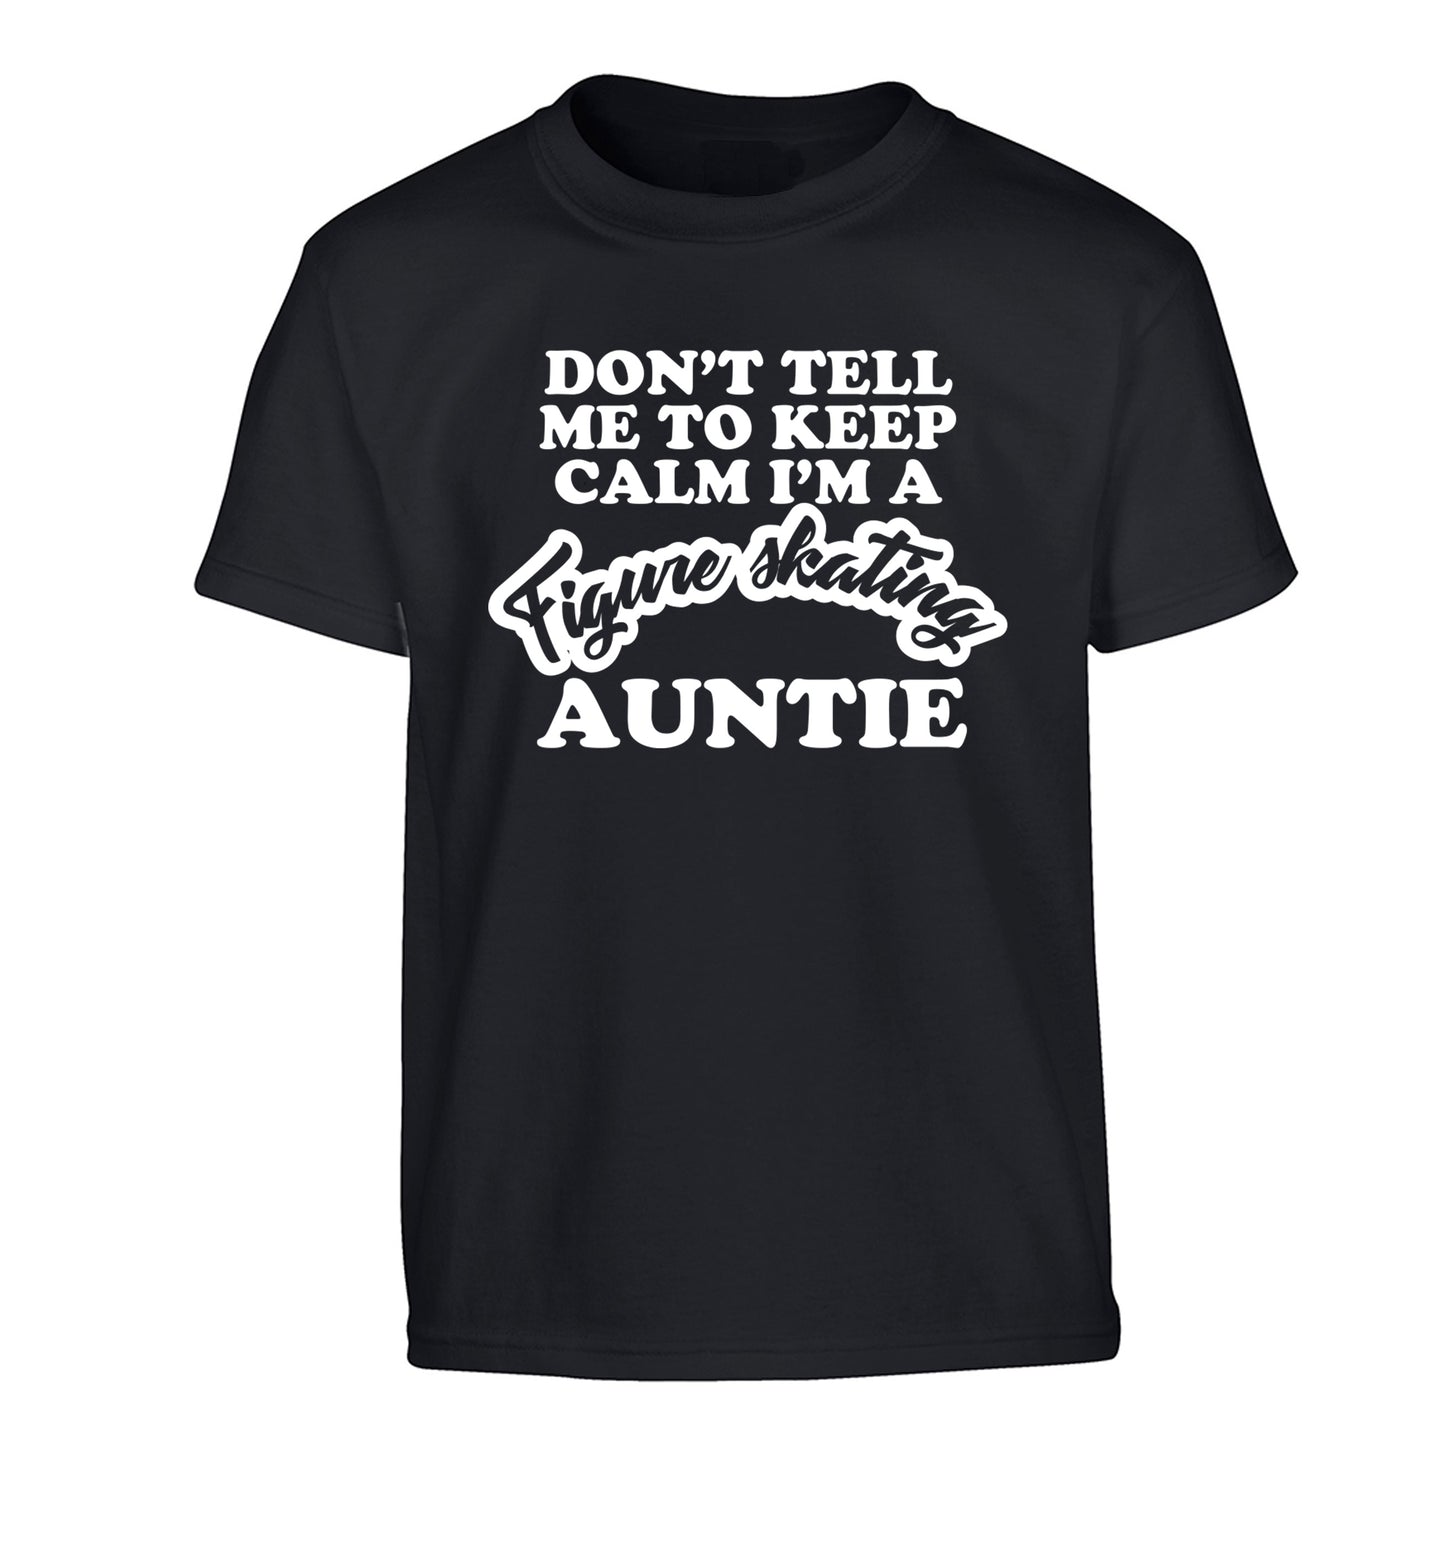 Don't tell me to keep calm I'm a figure skating auntie Children's black Tshirt 12-14 Years